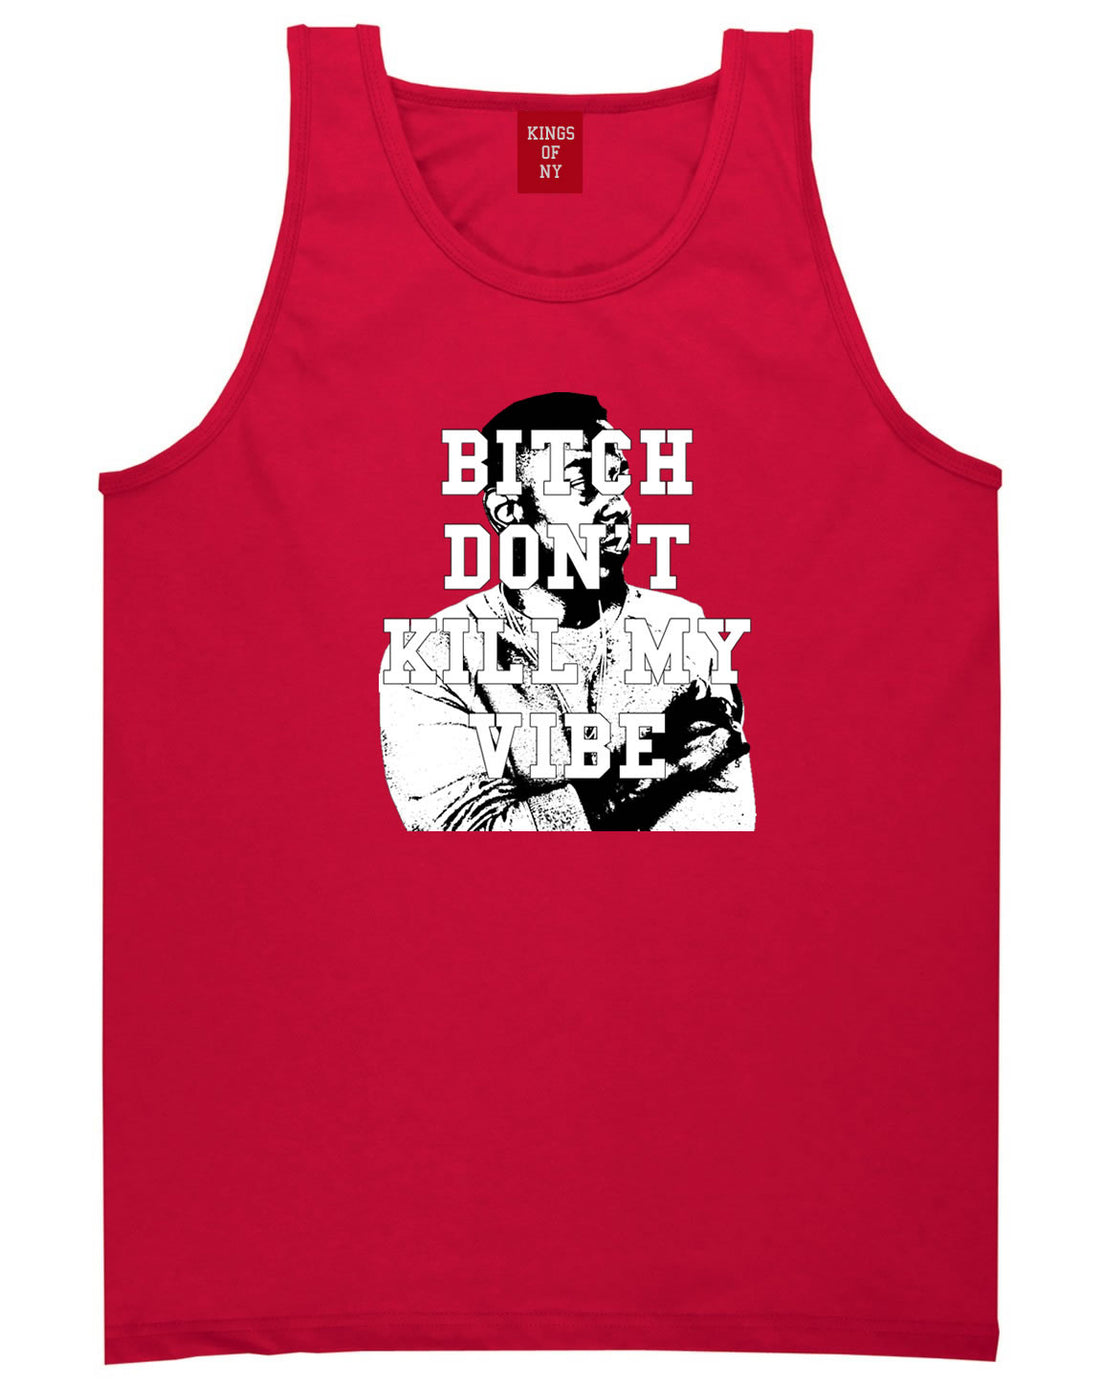 Bitch Dont Kill My Vibe Kendrick Tank Top In Red by Kings Of NY